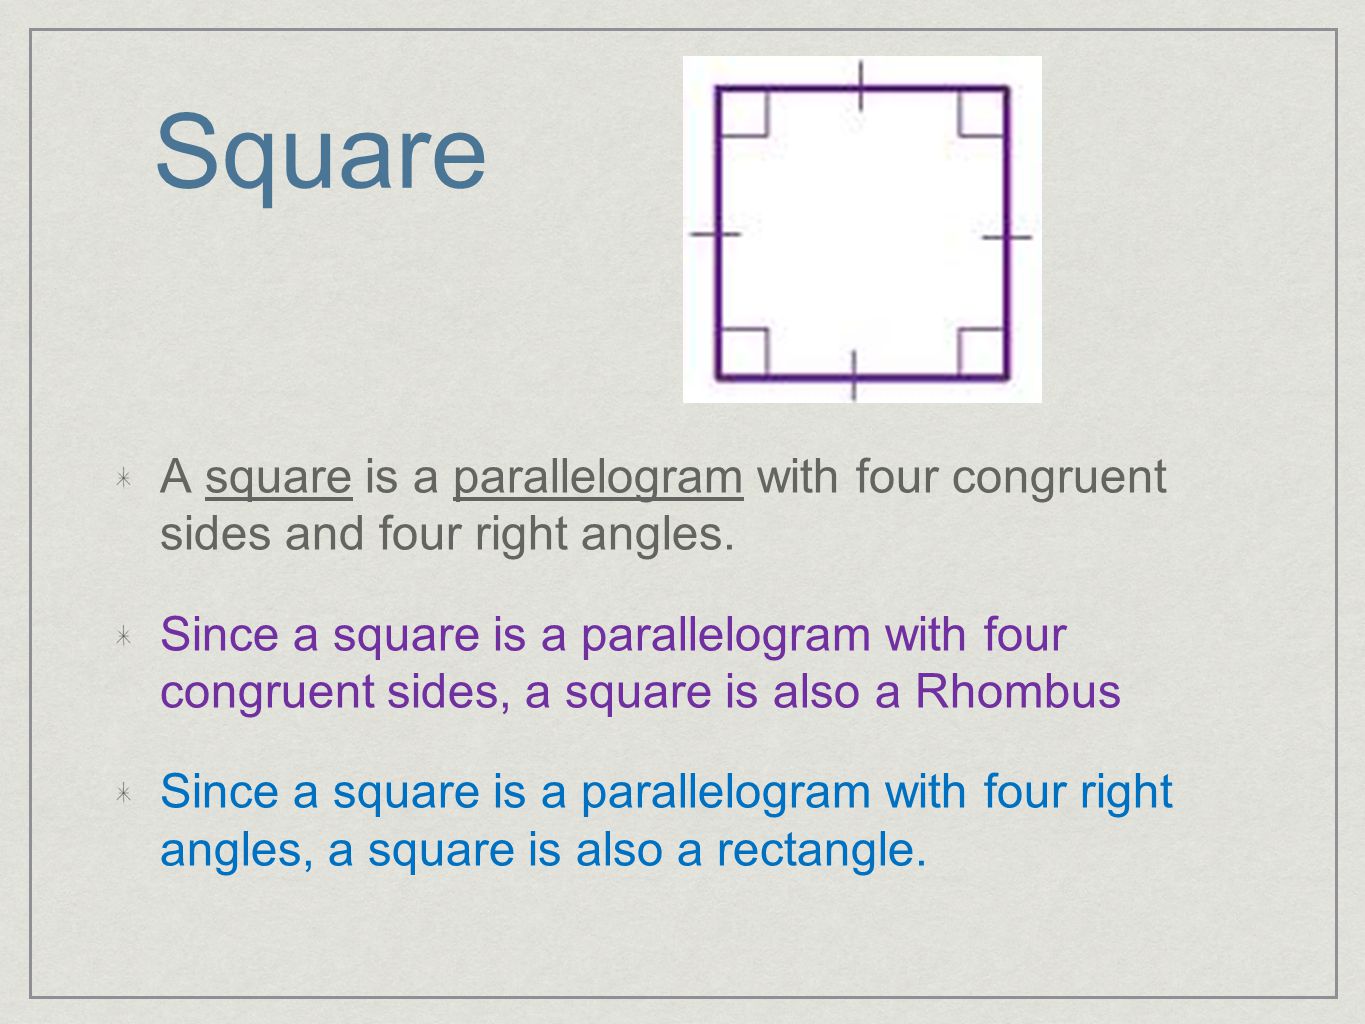 Square A square is a parallelogram with four congruent sides and four right angles.